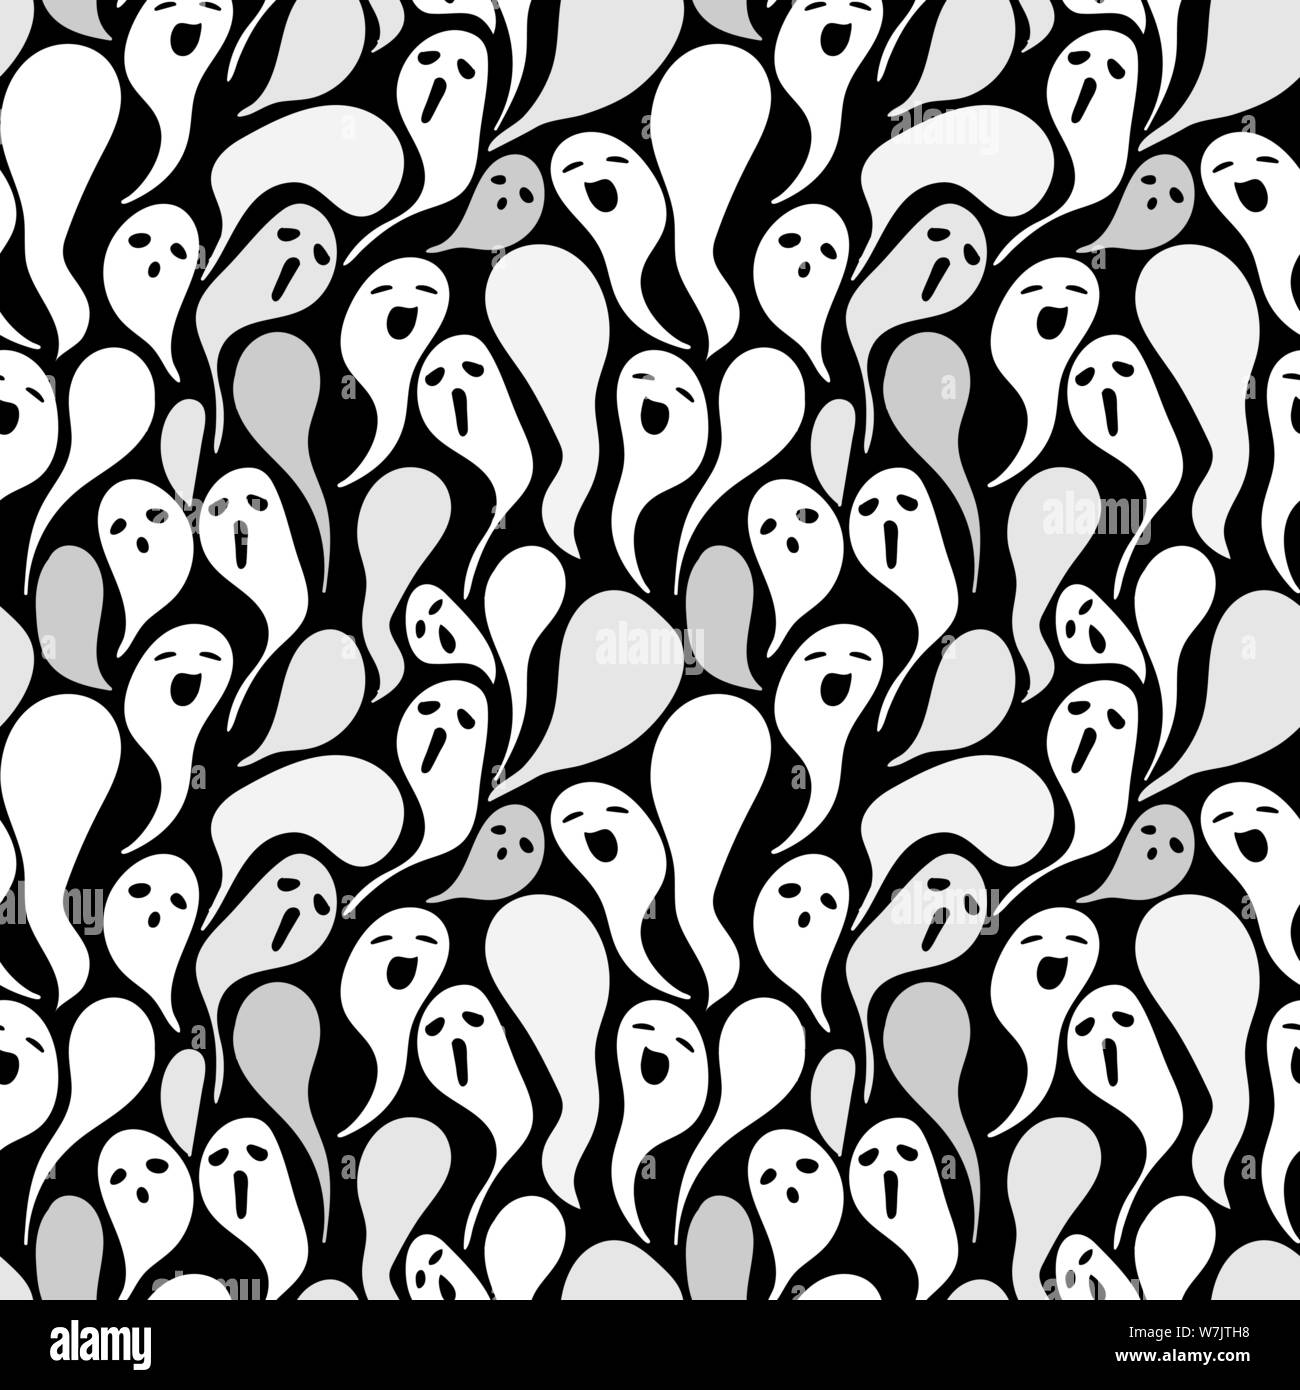 seamless vector halloween pattern with spooky ghost silhouettes on black background Stock Vector